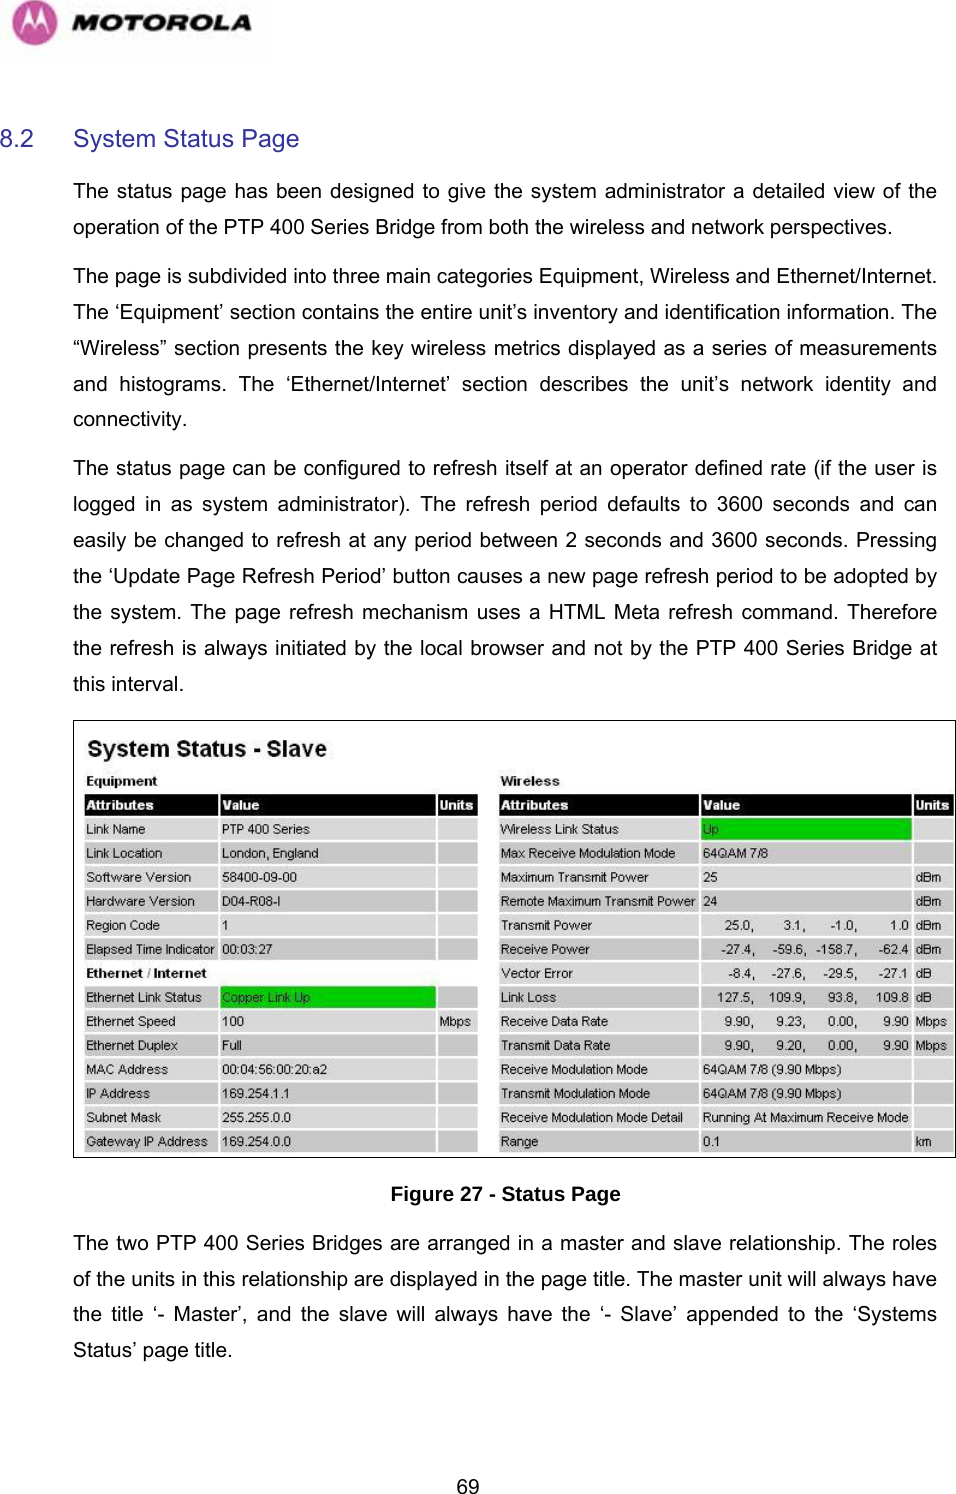   698.2  System Status Page  The status page has been designed to give the system administrator a detailed view of the operation of the PTP 400 Series Bridge from both the wireless and network perspectives.  The page is subdivided into three main categories Equipment, Wireless and Ethernet/Internet. The ‘Equipment’ section contains the entire unit’s inventory and identification information. The “Wireless” section presents the key wireless metrics displayed as a series of measurements and histograms. The ‘Ethernet/Internet’ section describes the unit’s network identity and connectivity. The status page can be configured to refresh itself at an operator defined rate (if the user is logged in as system administrator). The refresh period defaults to 3600 seconds and can easily be changed to refresh at any period between 2 seconds and 3600 seconds. Pressing the ‘Update Page Refresh Period’ button causes a new page refresh period to be adopted by the system. The page refresh mechanism uses a HTML Meta refresh command. Therefore the refresh is always initiated by the local browser and not by the PTP 400 Series Bridge at this interval.  Figure 27 - Status Page The two PTP 400 Series Bridges are arranged in a master and slave relationship. The roles of the units in this relationship are displayed in the page title. The master unit will always have the title ‘- Master’, and the slave will always have the ‘- Slave’ appended to the ‘Systems Status’ page title. 